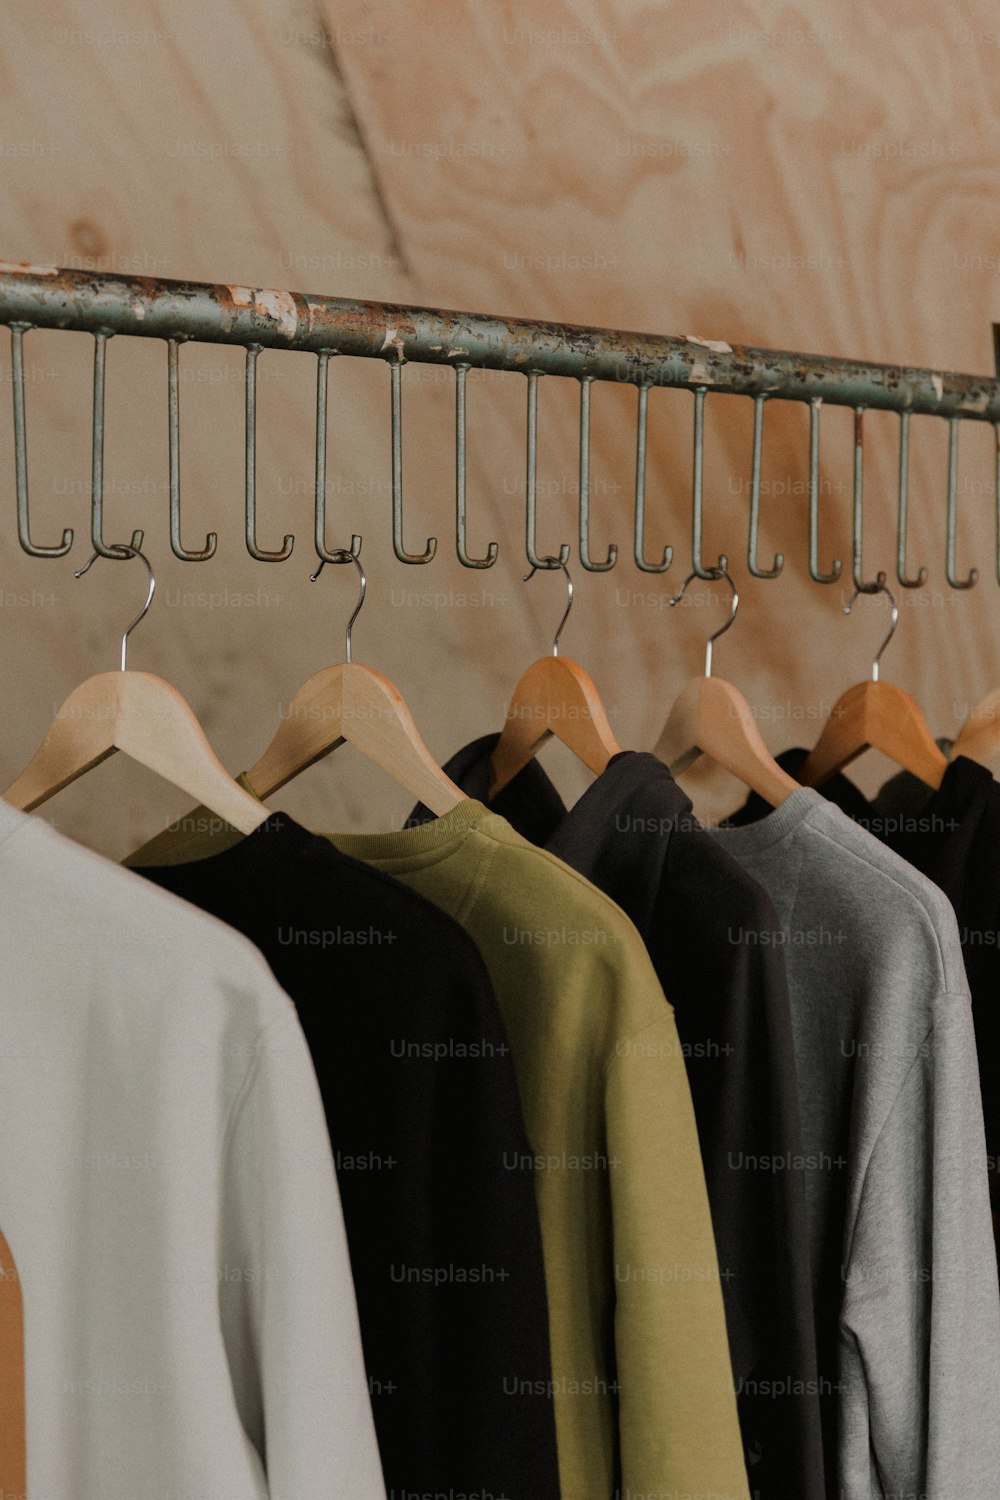 a row of shirts hanging on a clothes rack